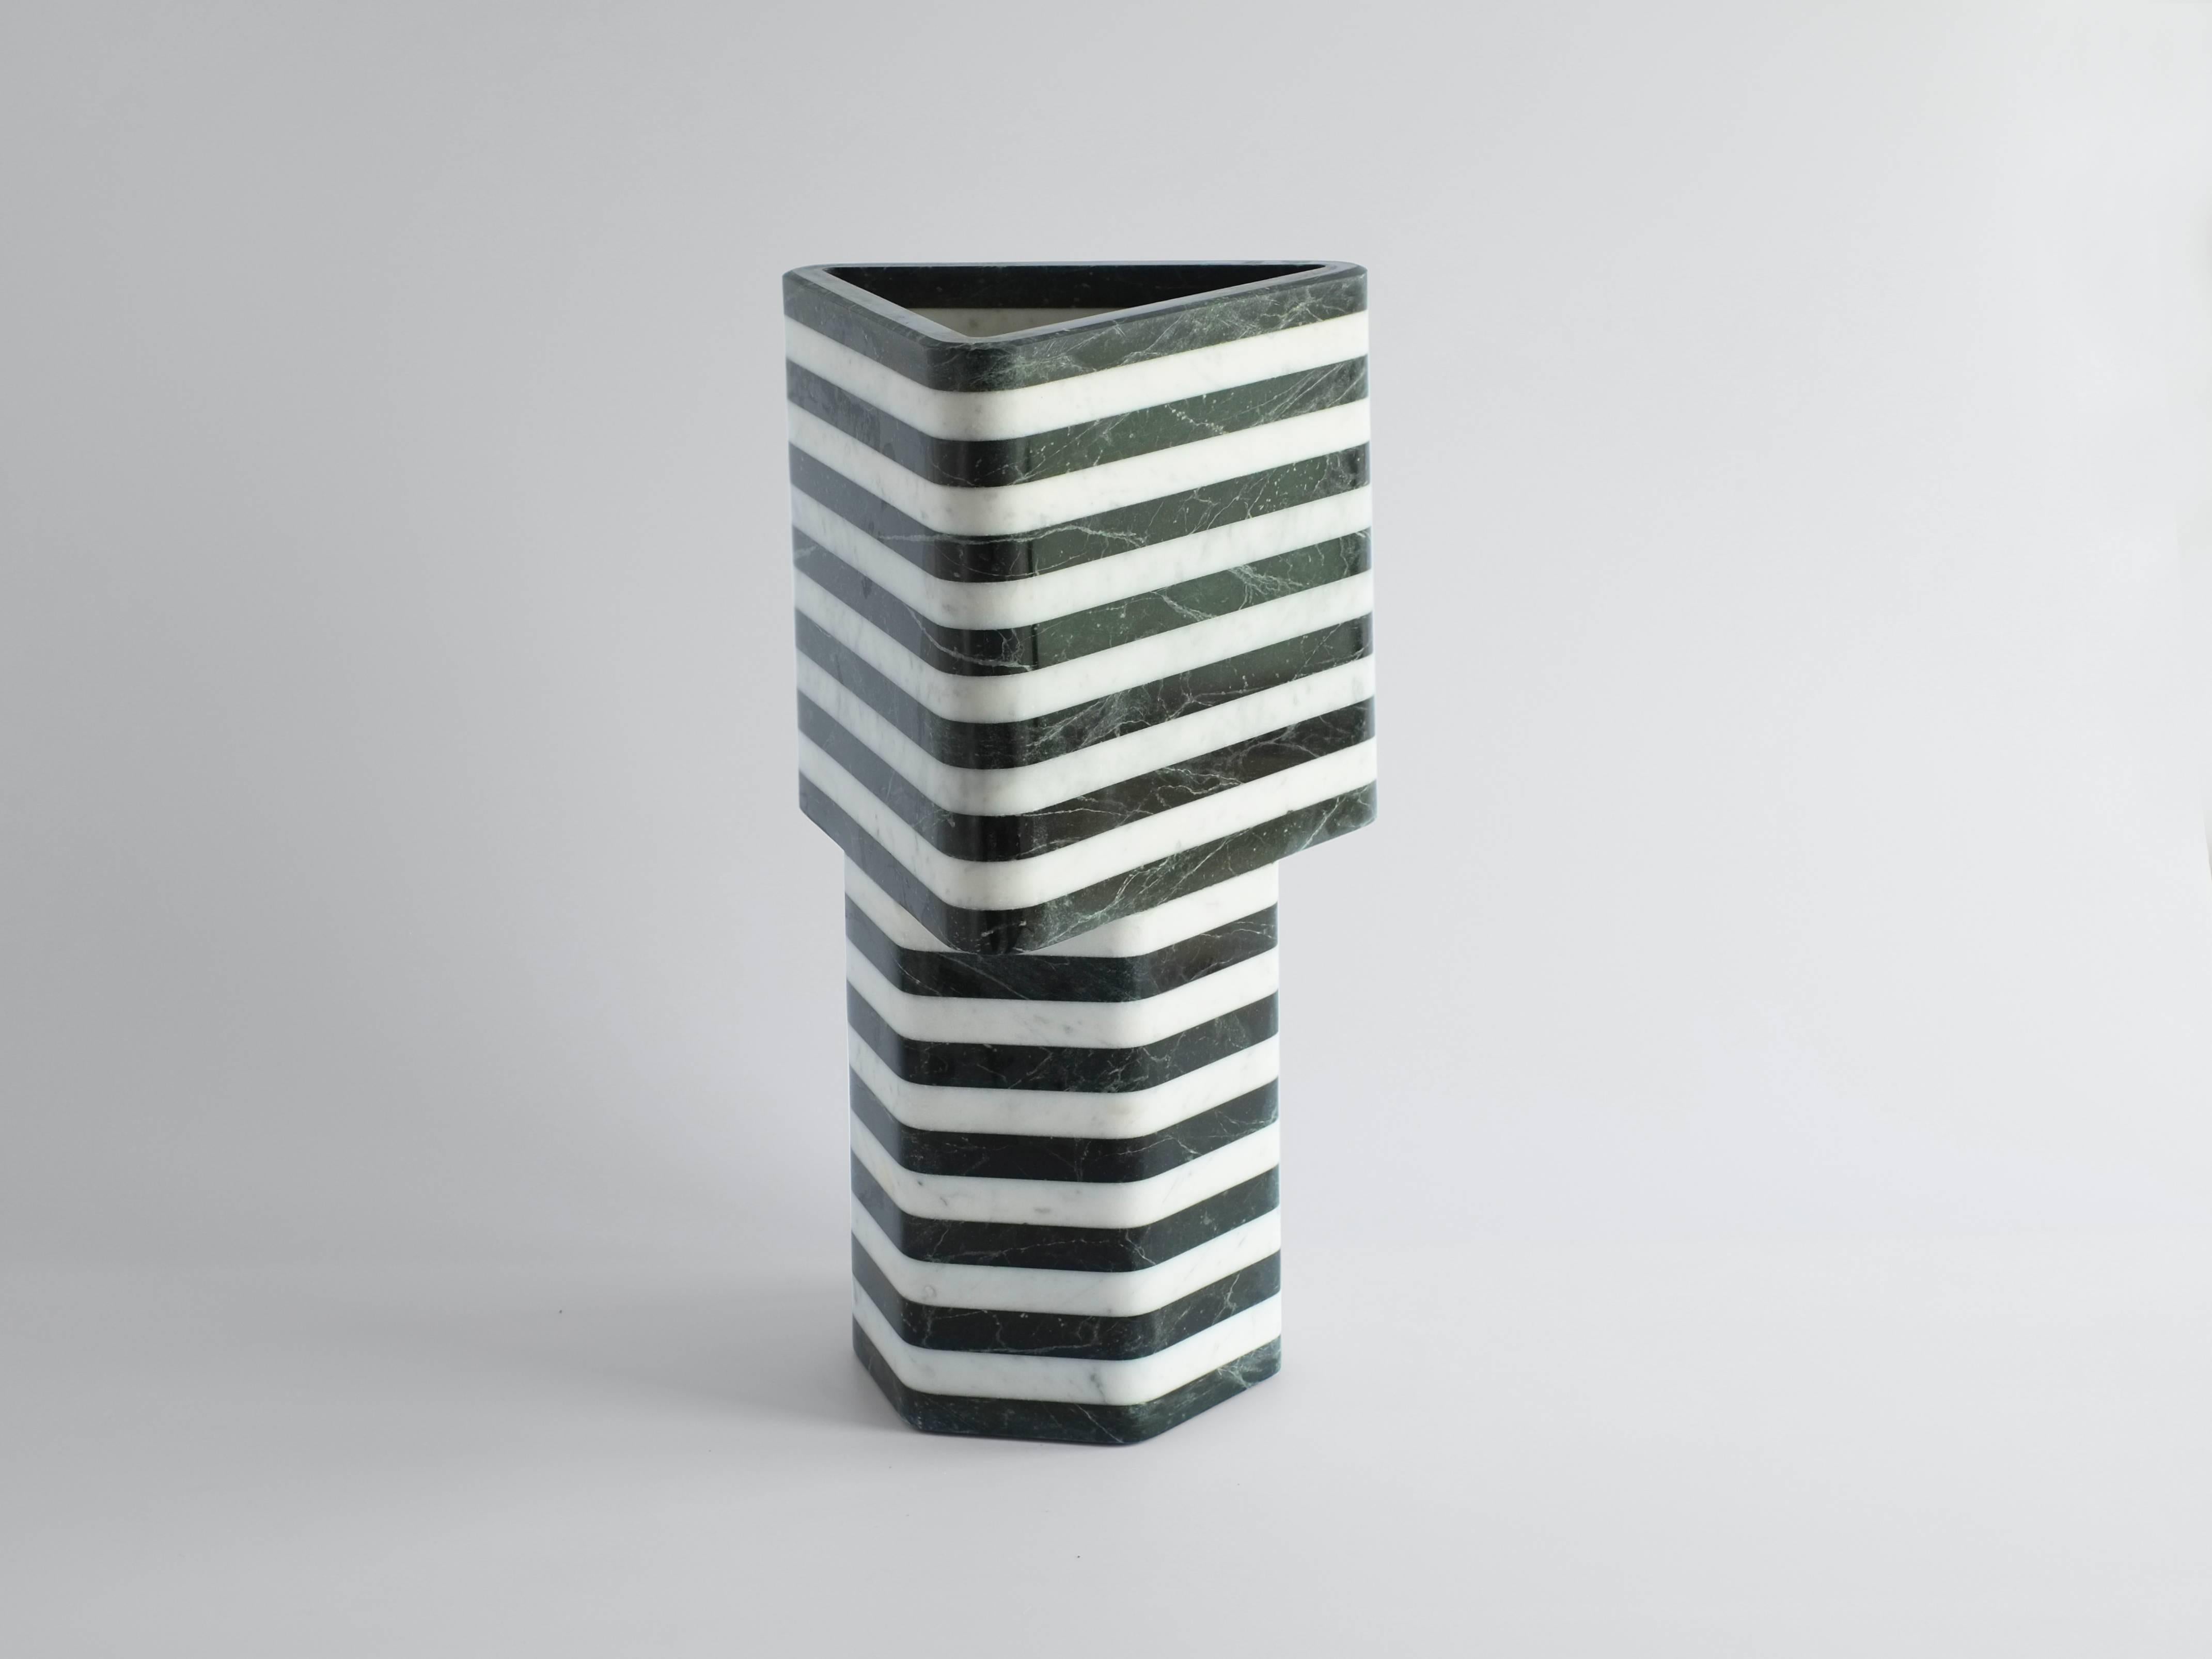 Contemporary Triangular-Hexagonal Stacked Stone Vessel in Marble by Fort Standard, in Stock